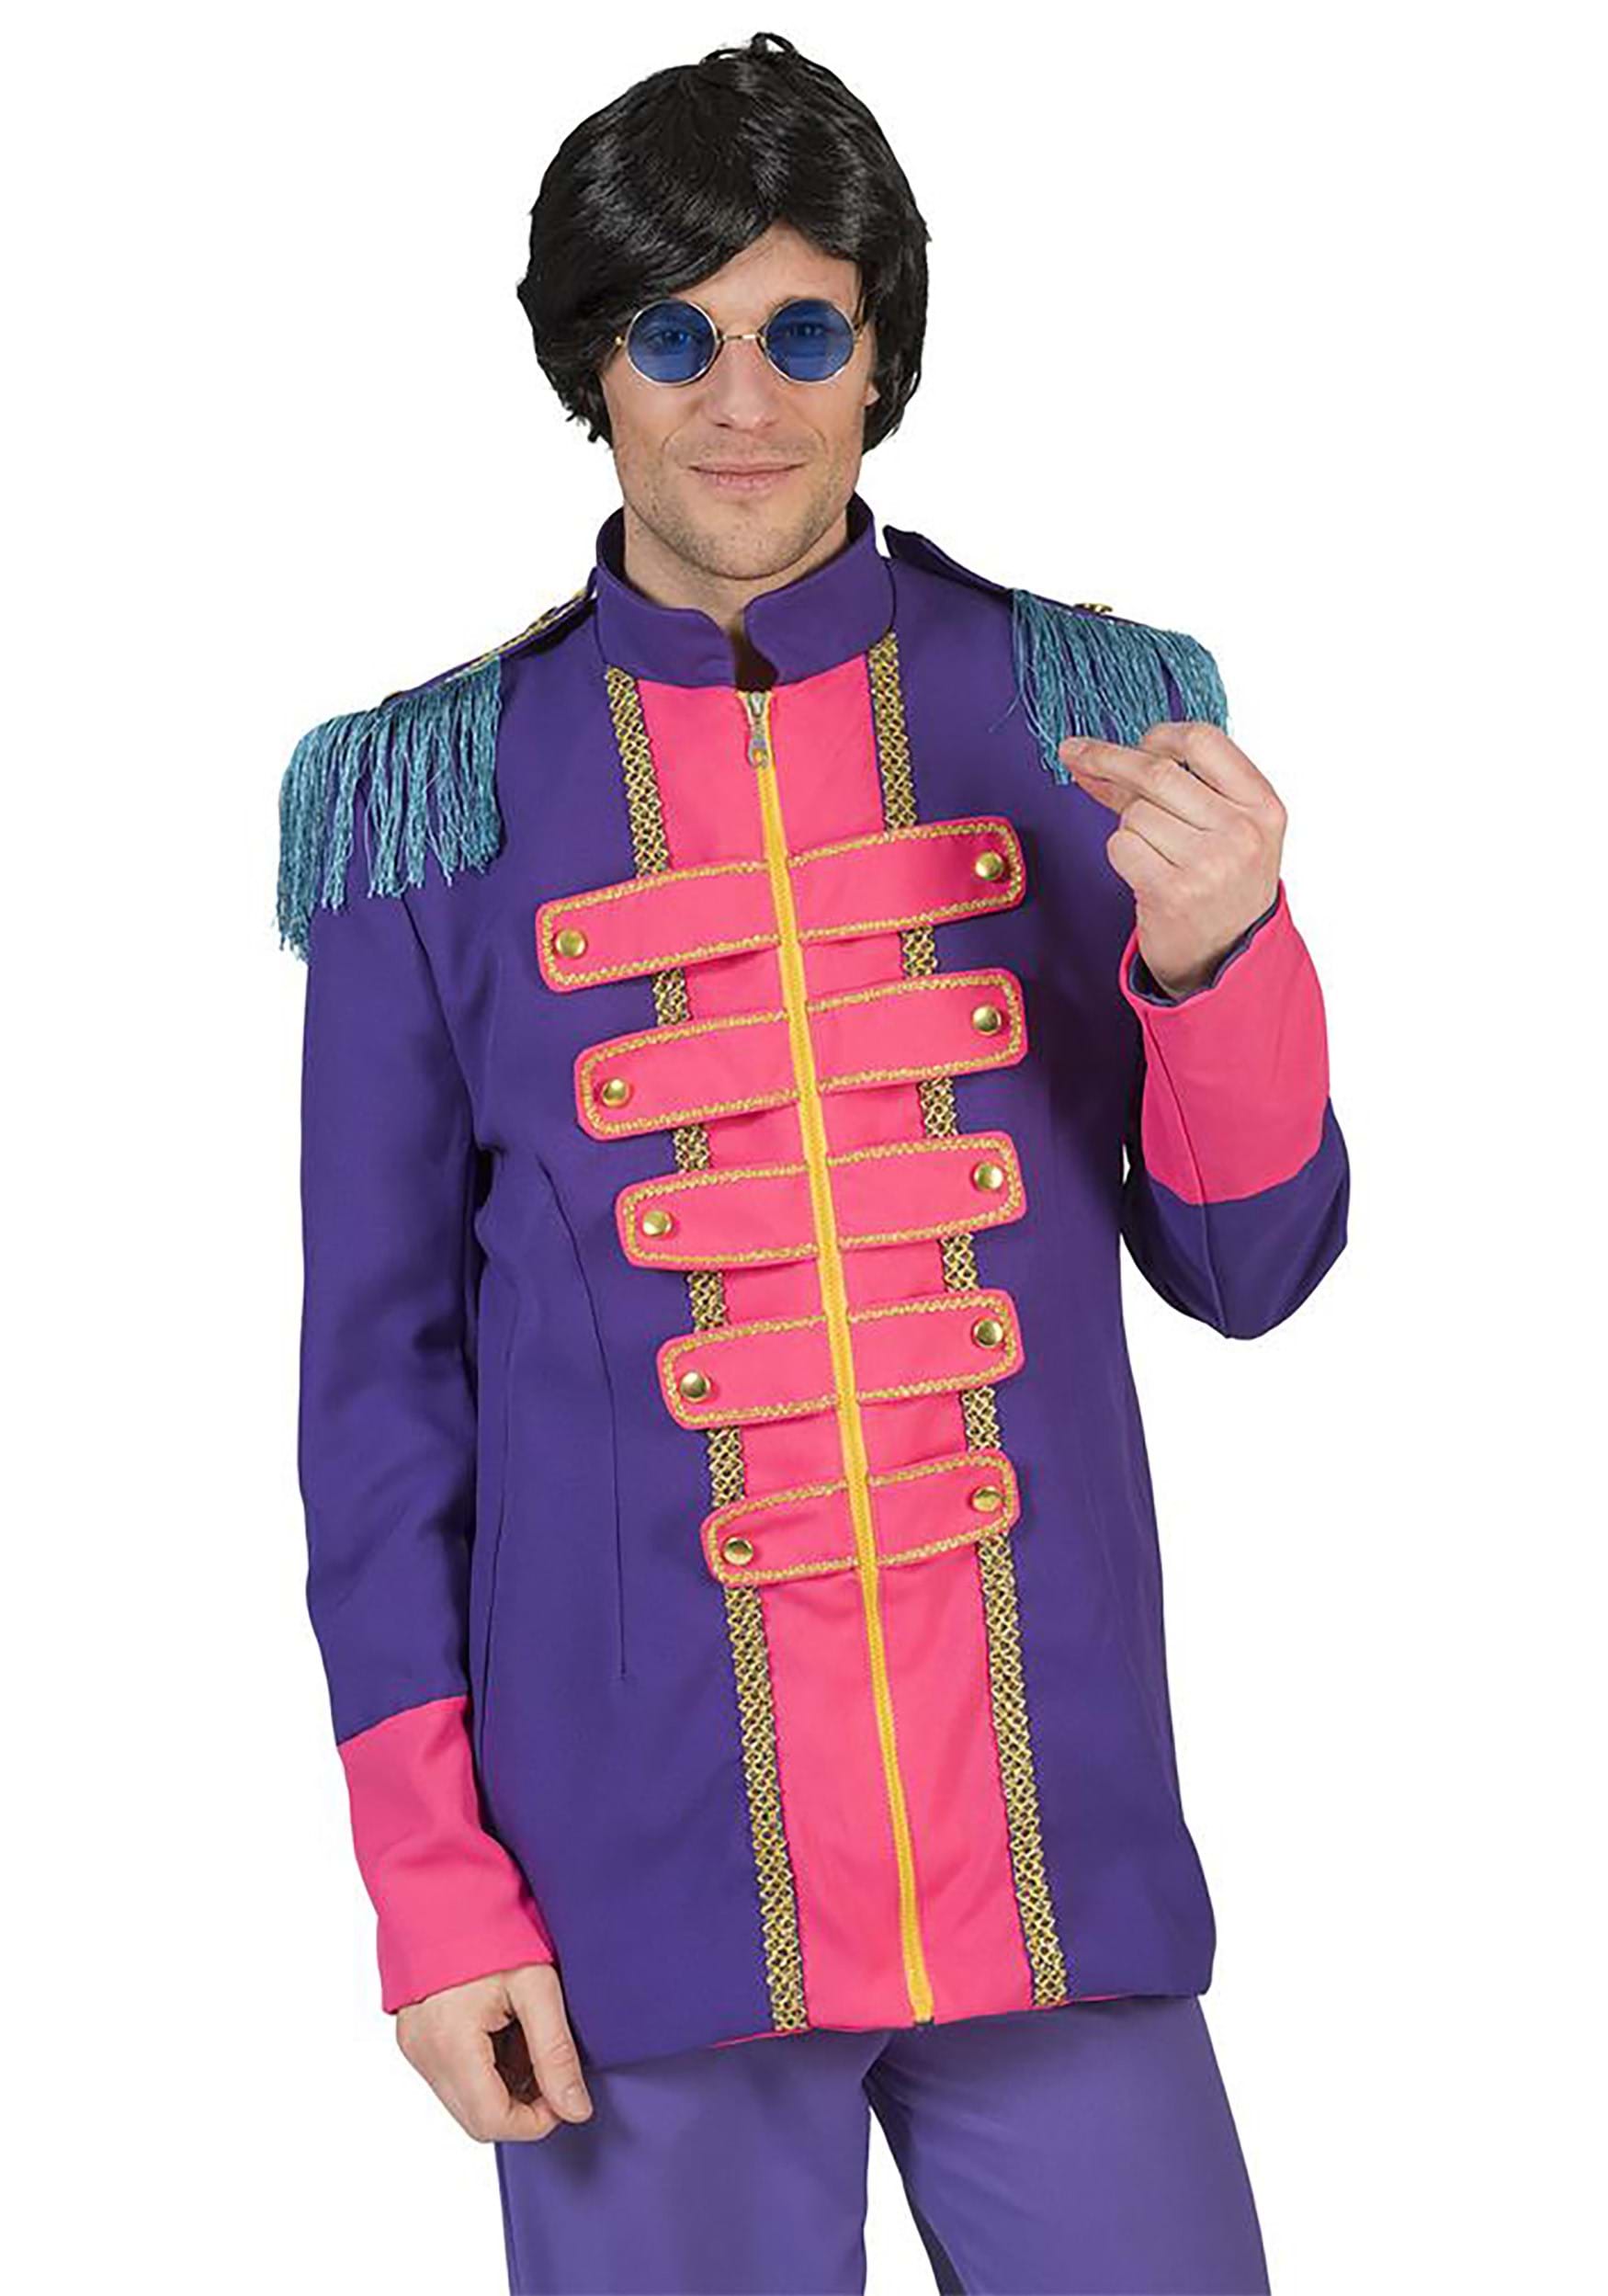 Image of Sgt Pepper Album Inspired Purple Jacket | Costume Jackets ID FY608374-L